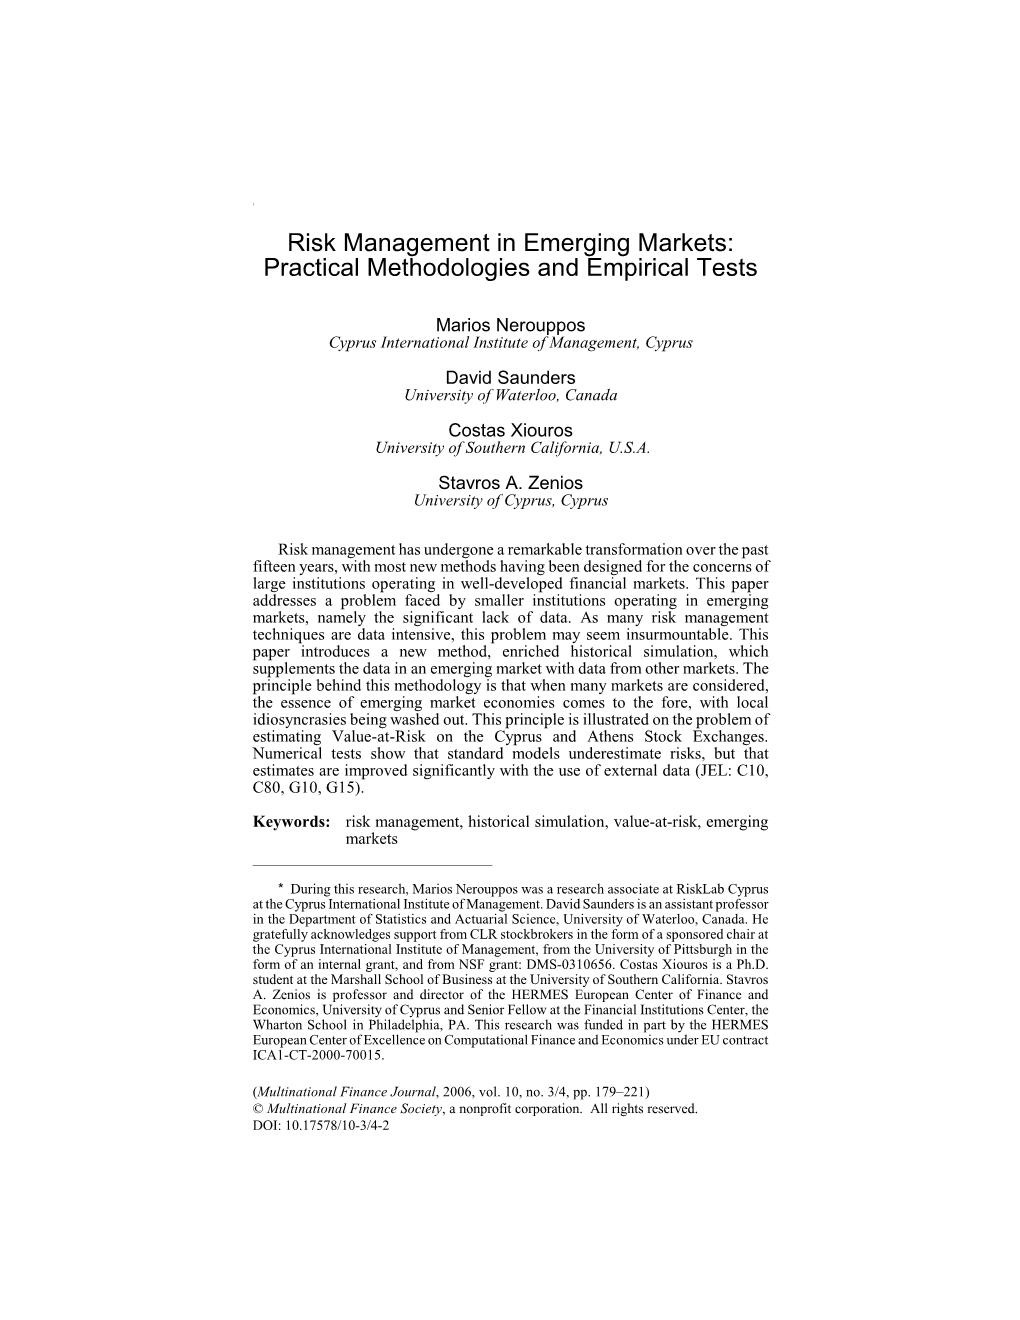 Risk Management in Emerging Markets: Practical Methodologies and Empirical Tests